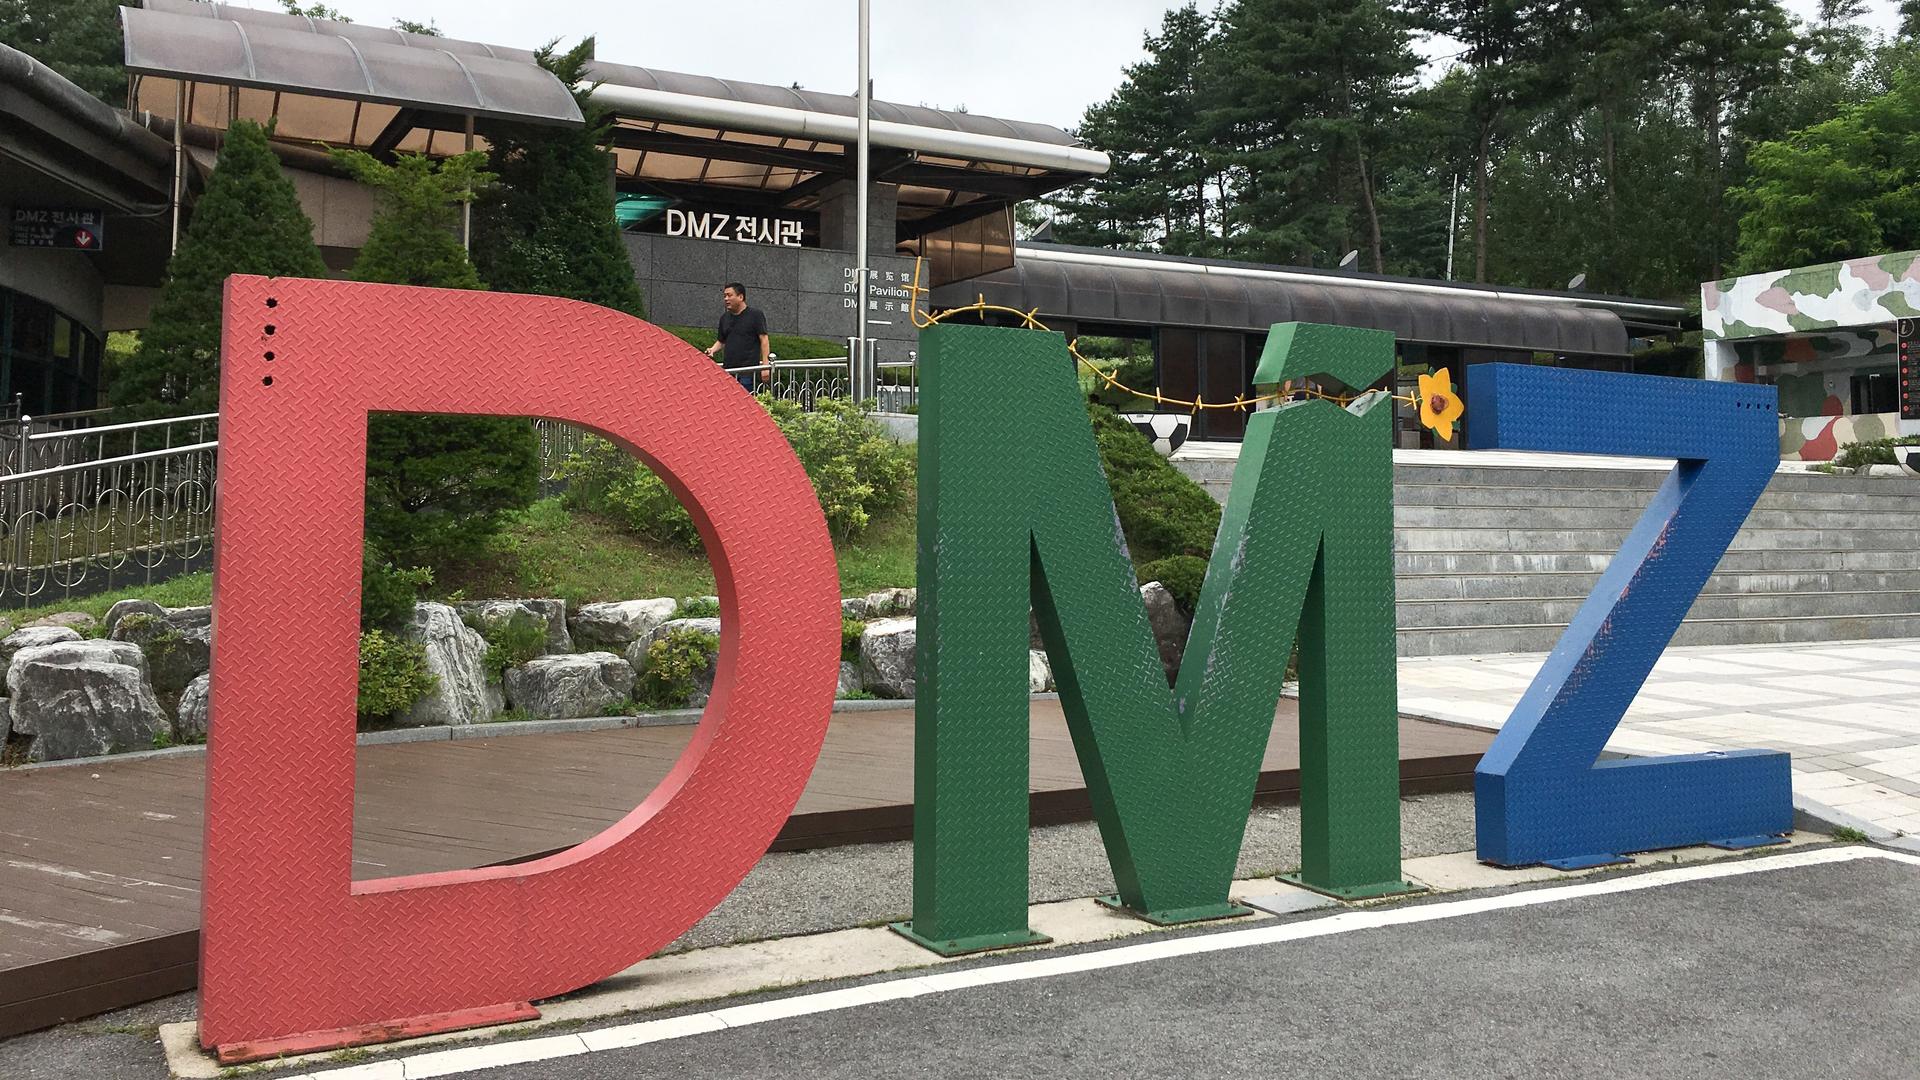 an old building with large DMZ letters out front 